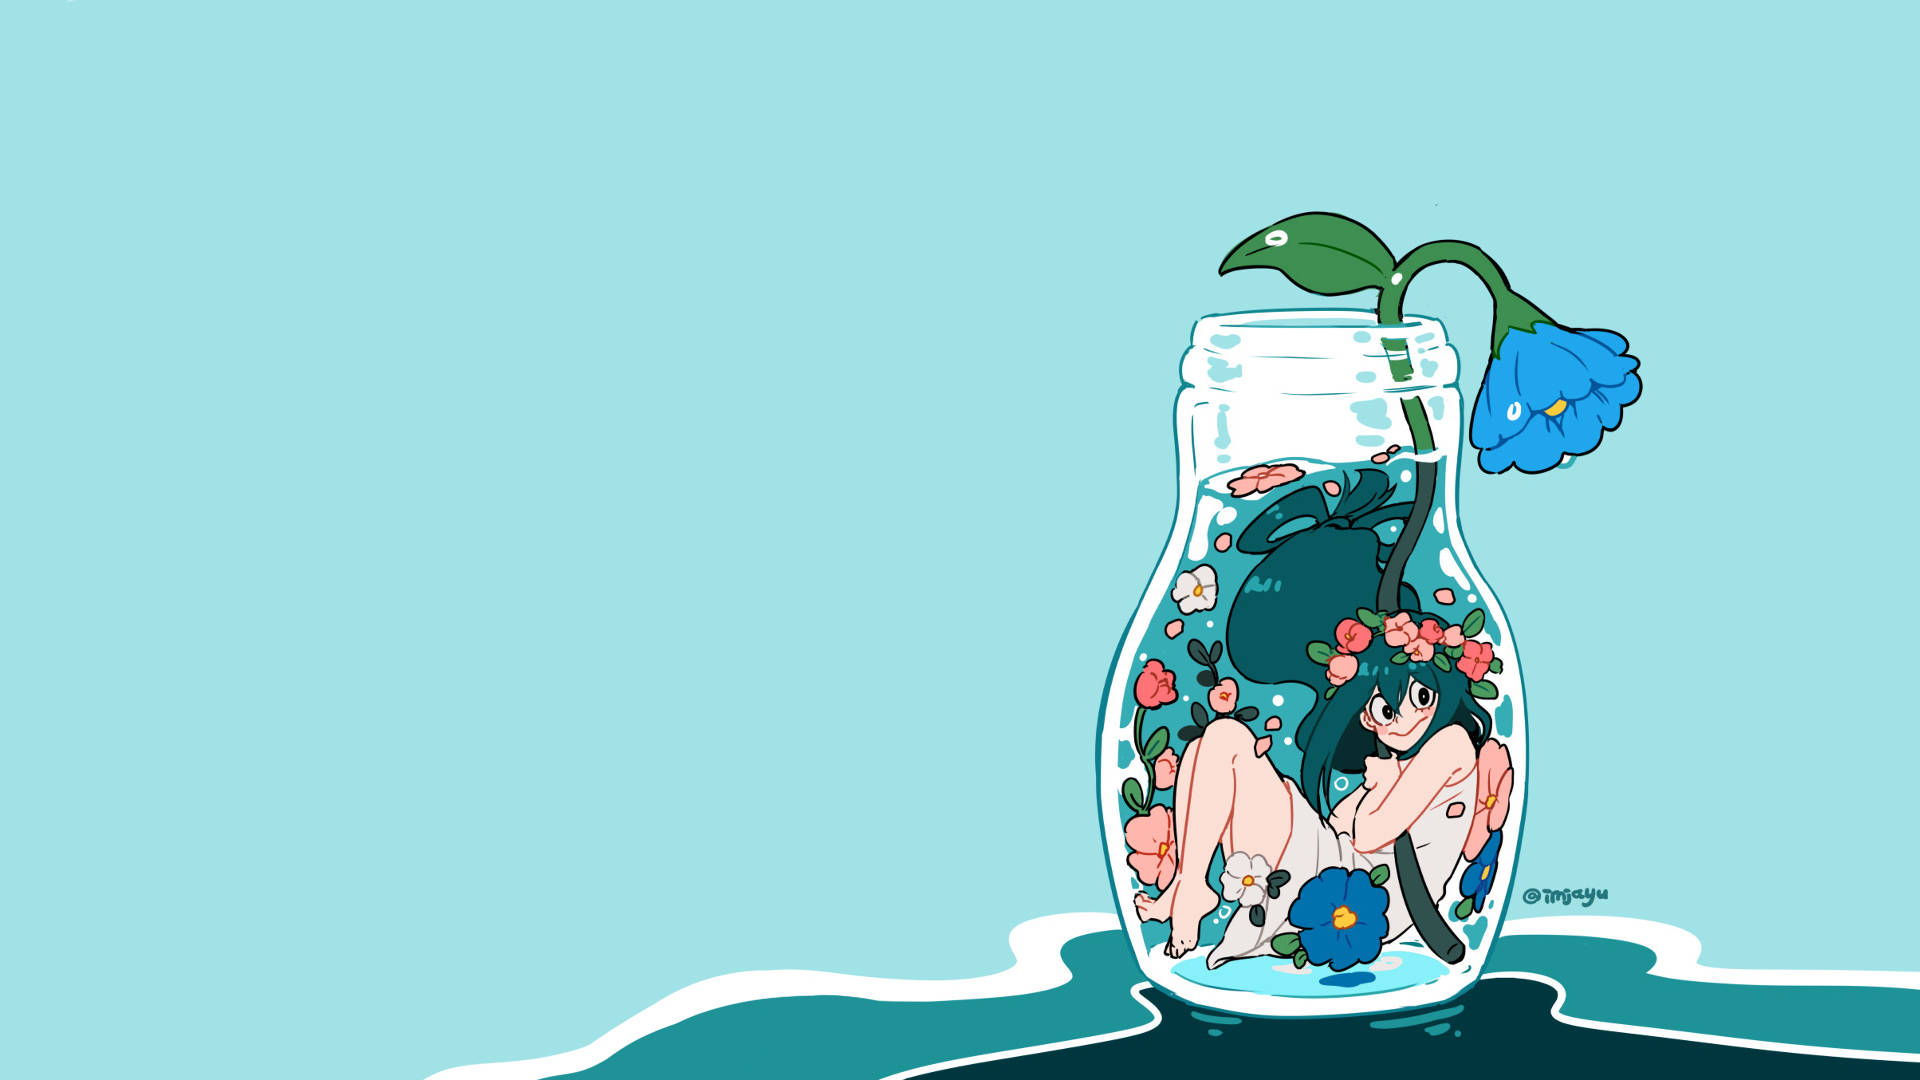 Bnha 1920X1080 Wallpaper and Background Image